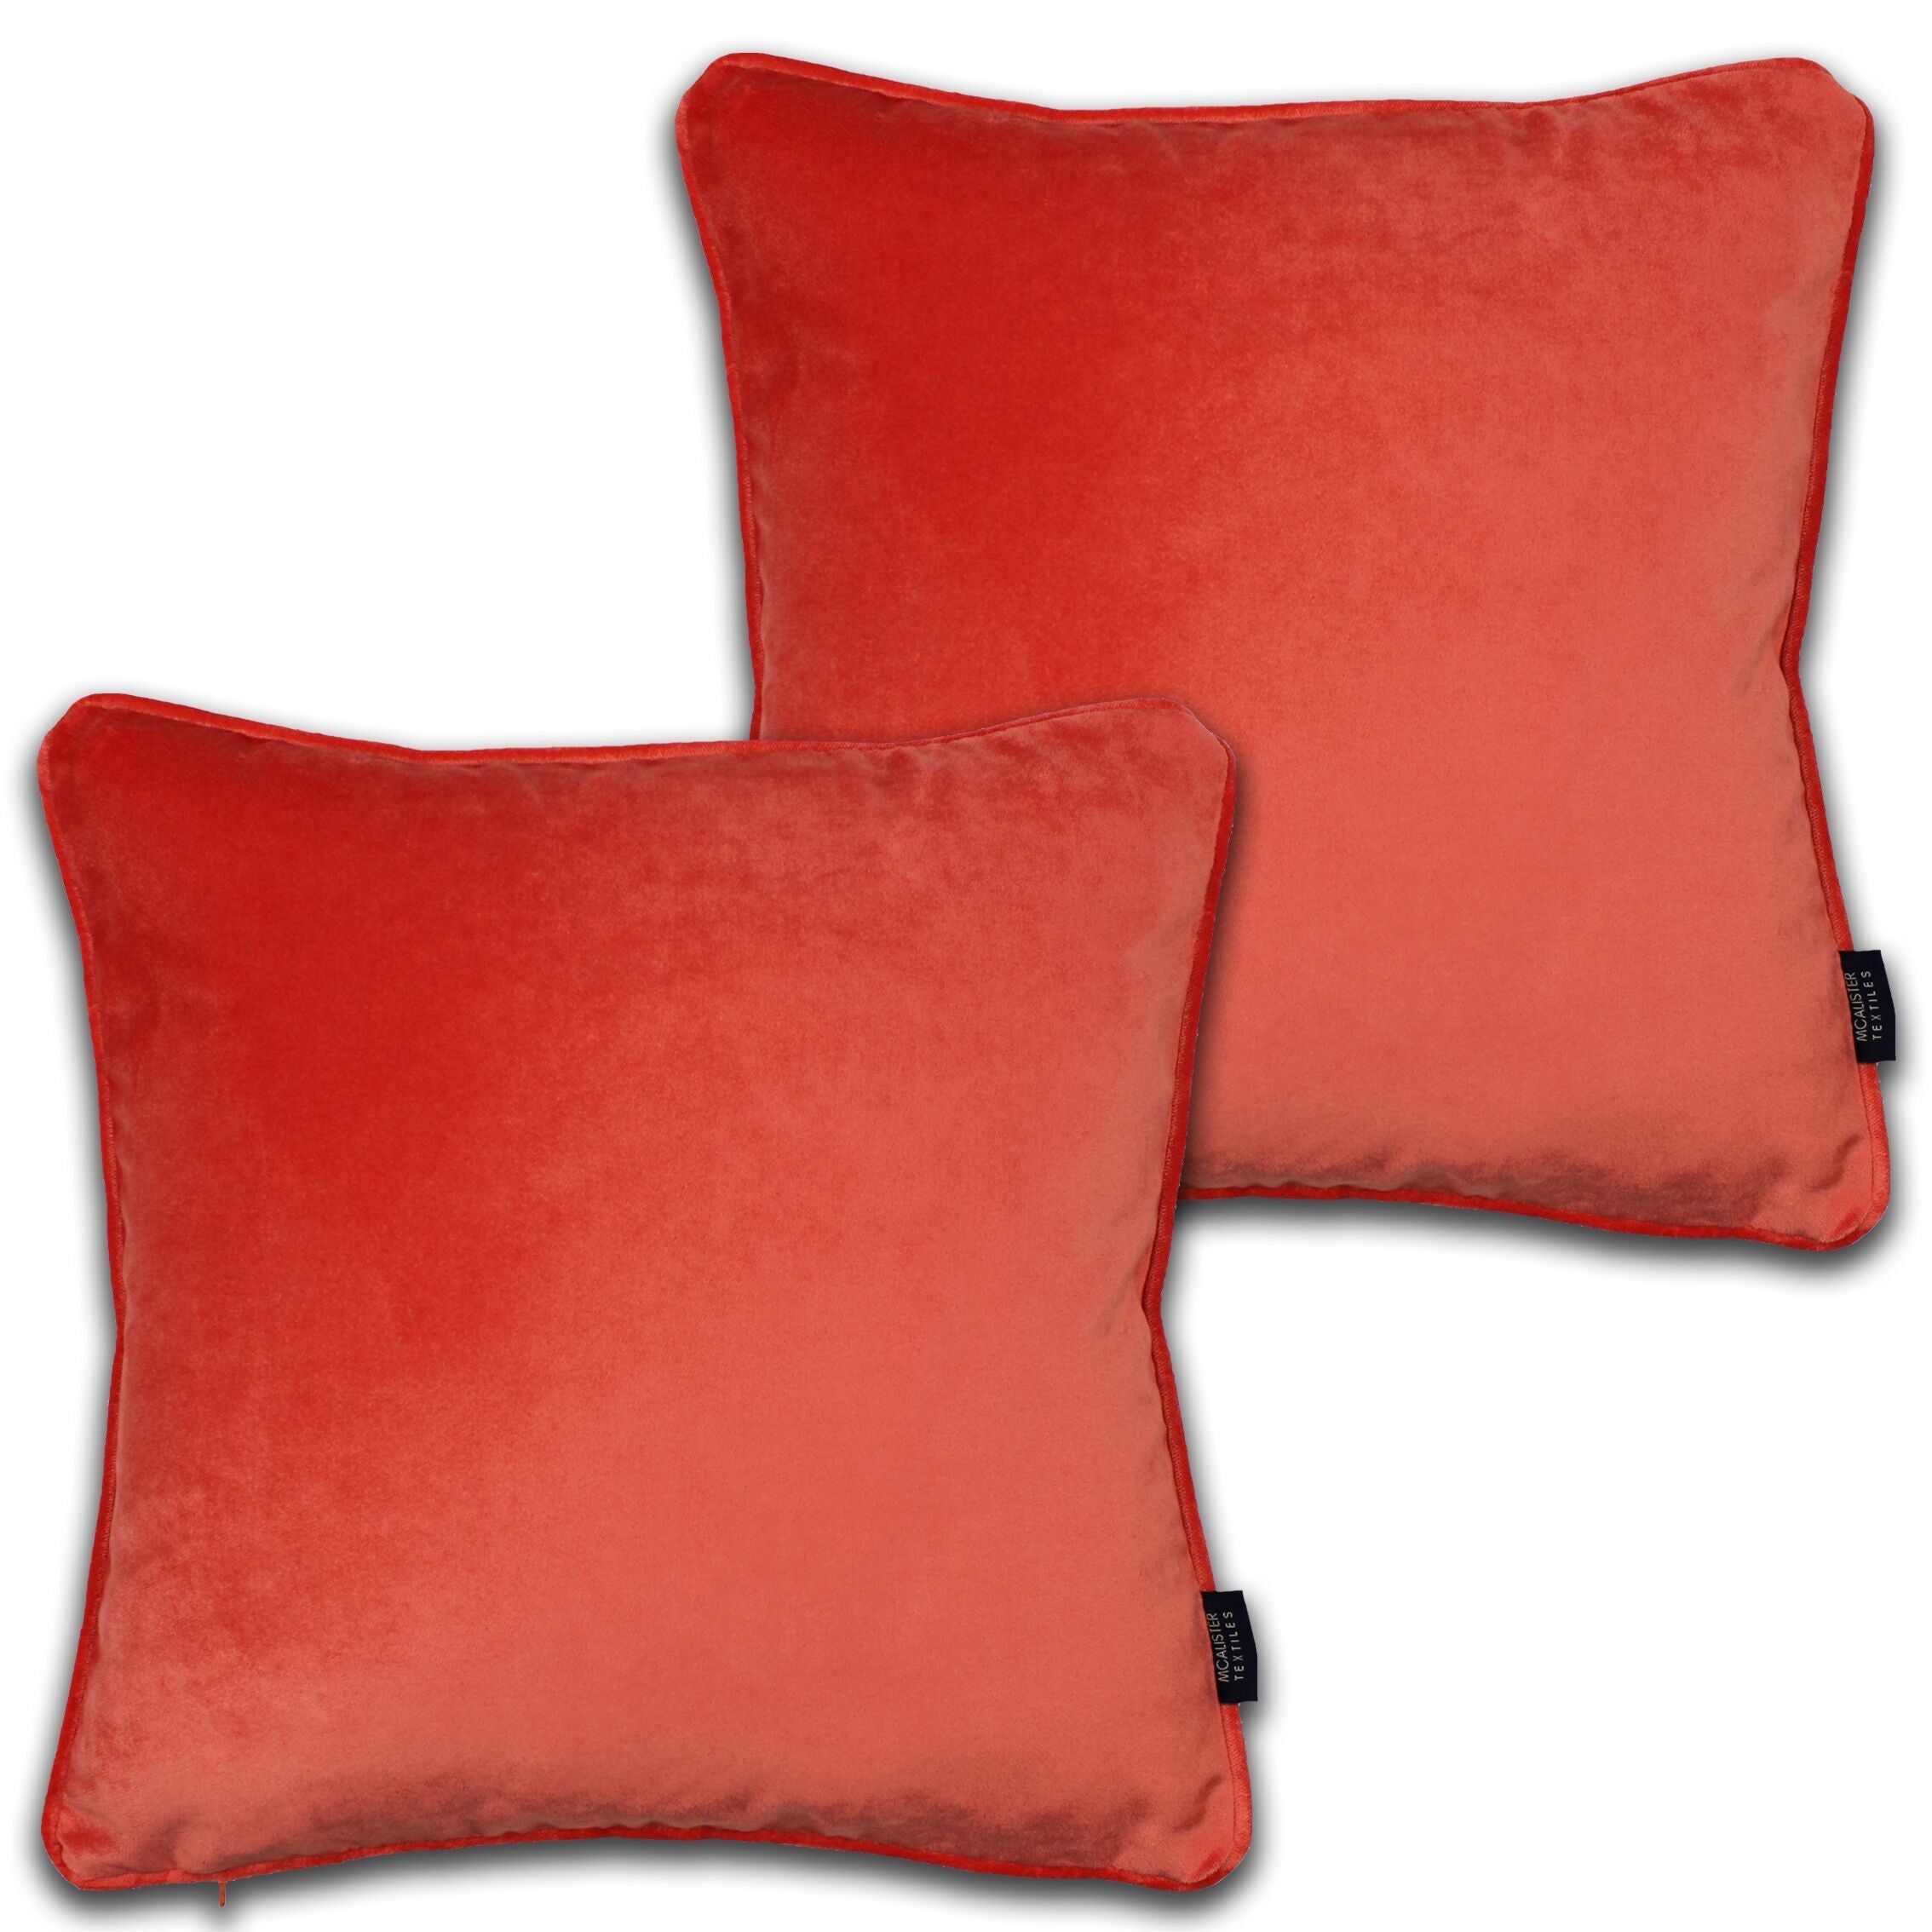 McAlister Textiles Matt Coral Pink Velvet 43cm x 43cm Piped Cushion Sets Cushions and Covers Cushion Covers Set of 2 